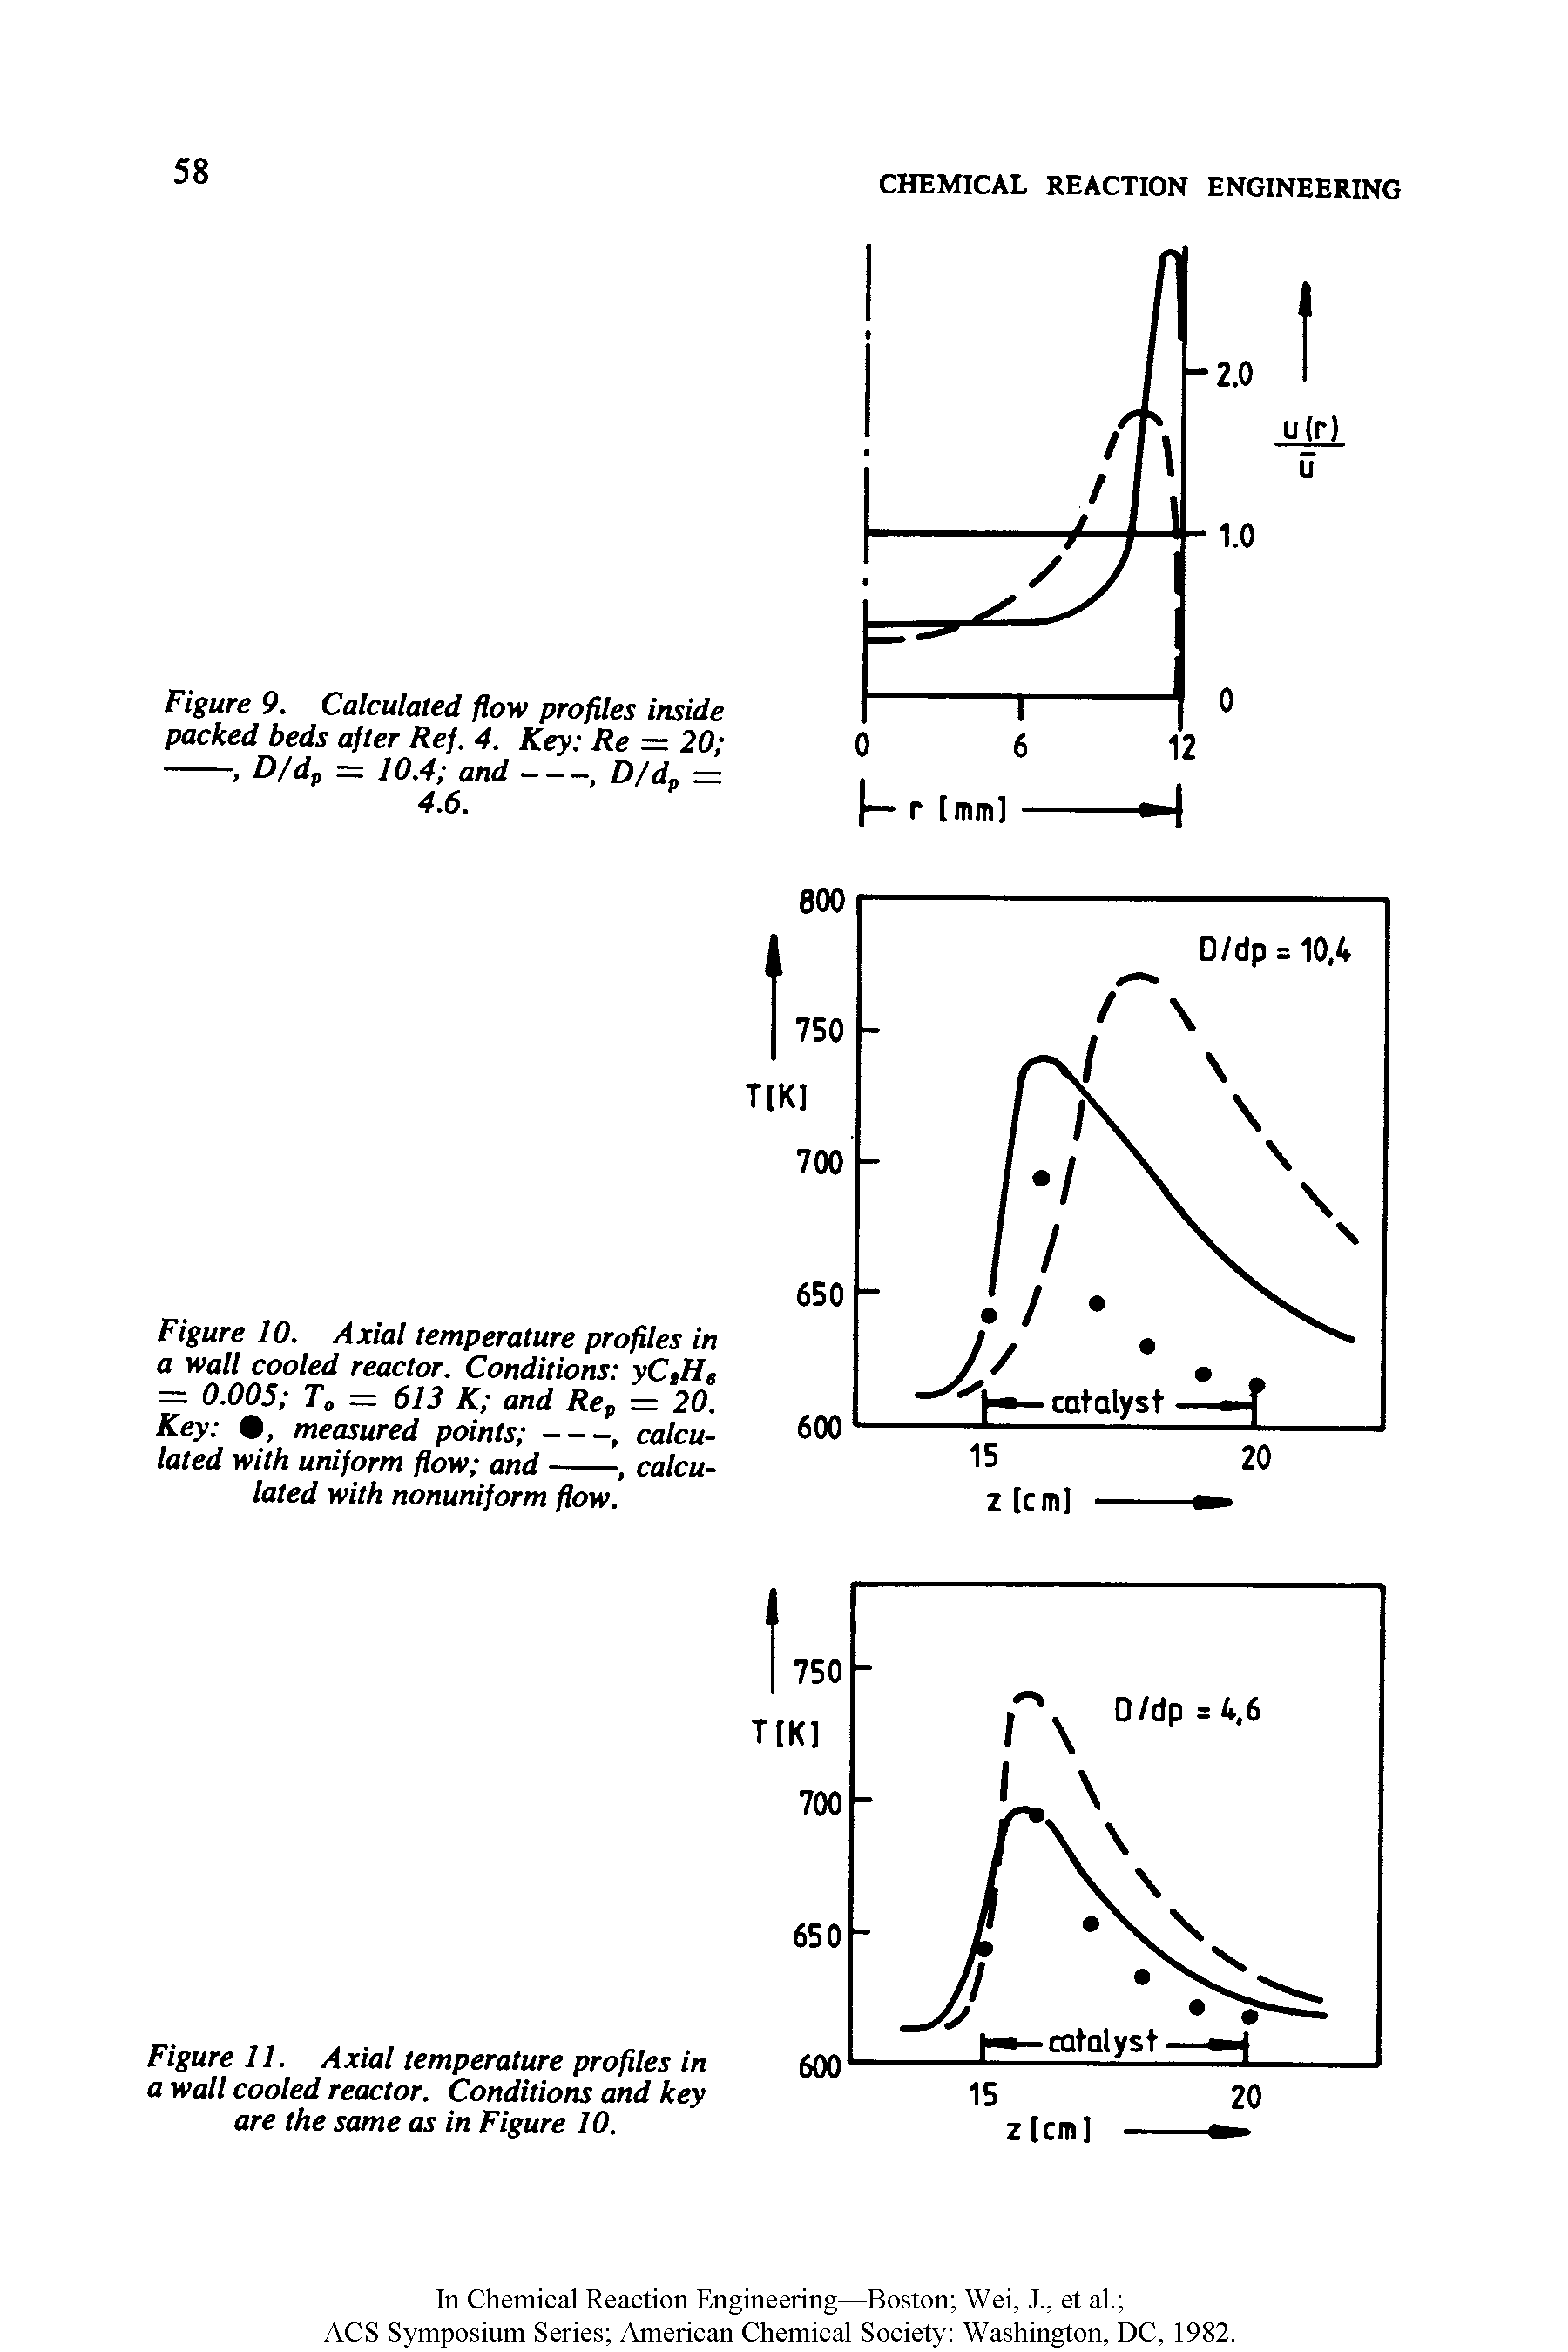 Figure 10. Axial temperature profiles in a wall cooled reactor. Conditions yC,He = 0.005 T — 613 K and Rep = 20. Key , measured points -------, calculated with uniform flow and---, calcu-...